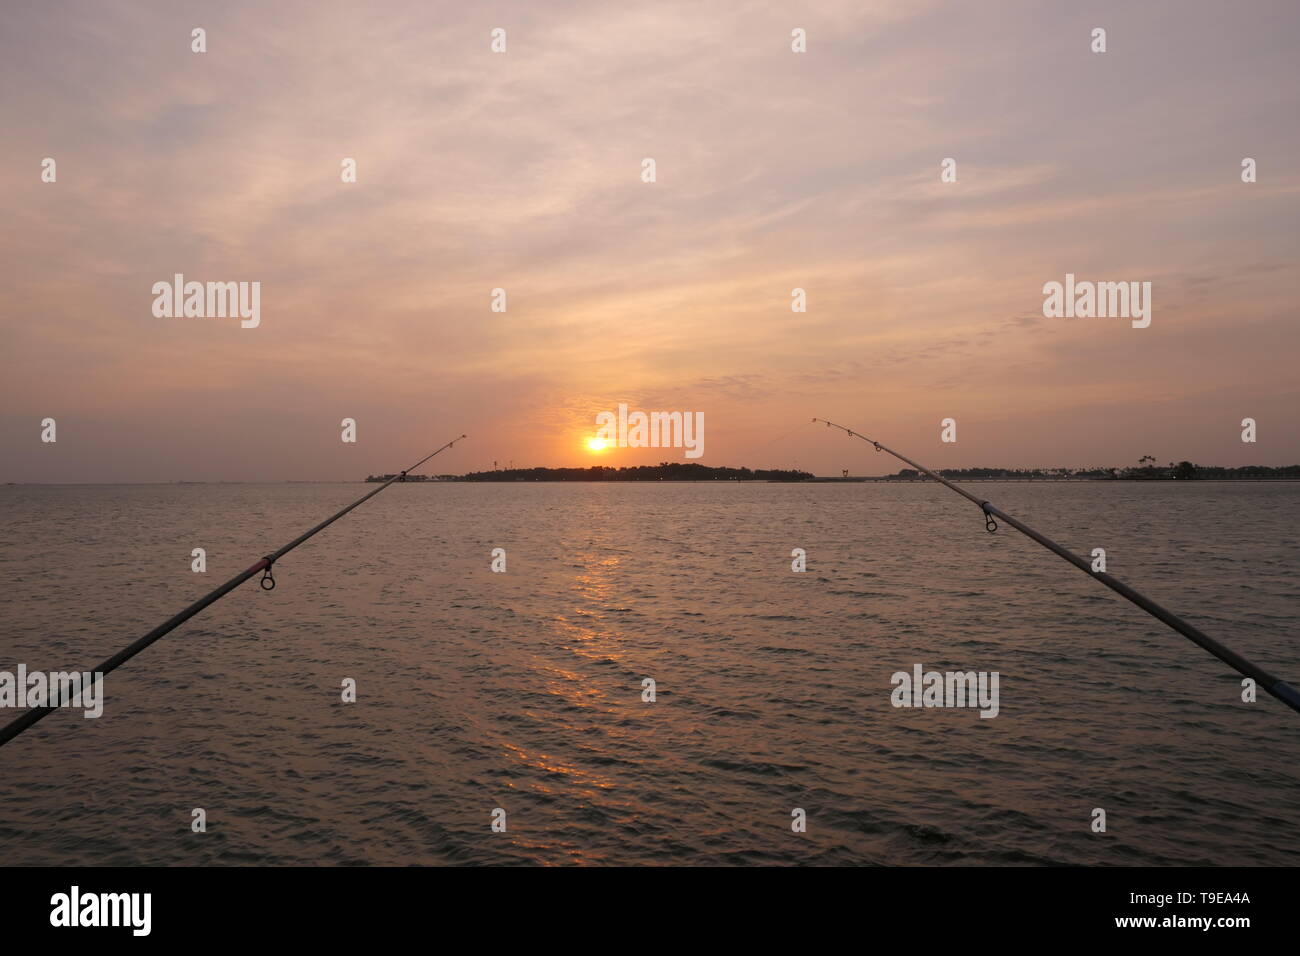 Natural and beautiful sunset with clear clouds and fishing rods in the background, at the coast of Jeddah, Saudi Arabia Stock Photo